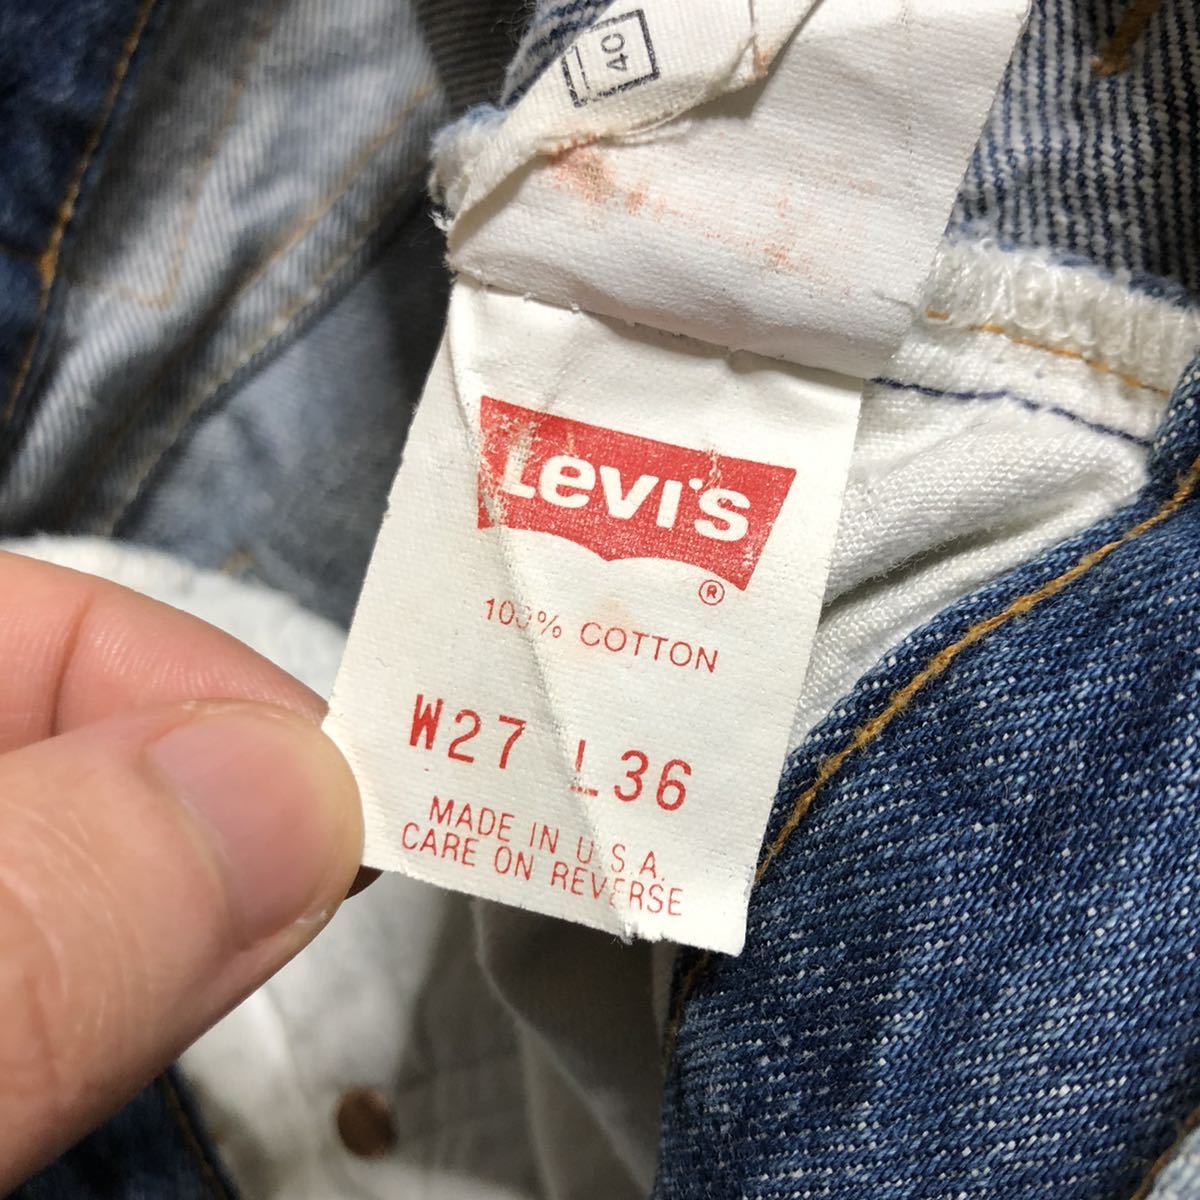 Levi\'s 501 Levi's 92 year made USA made 555 Denim pants jeans 27